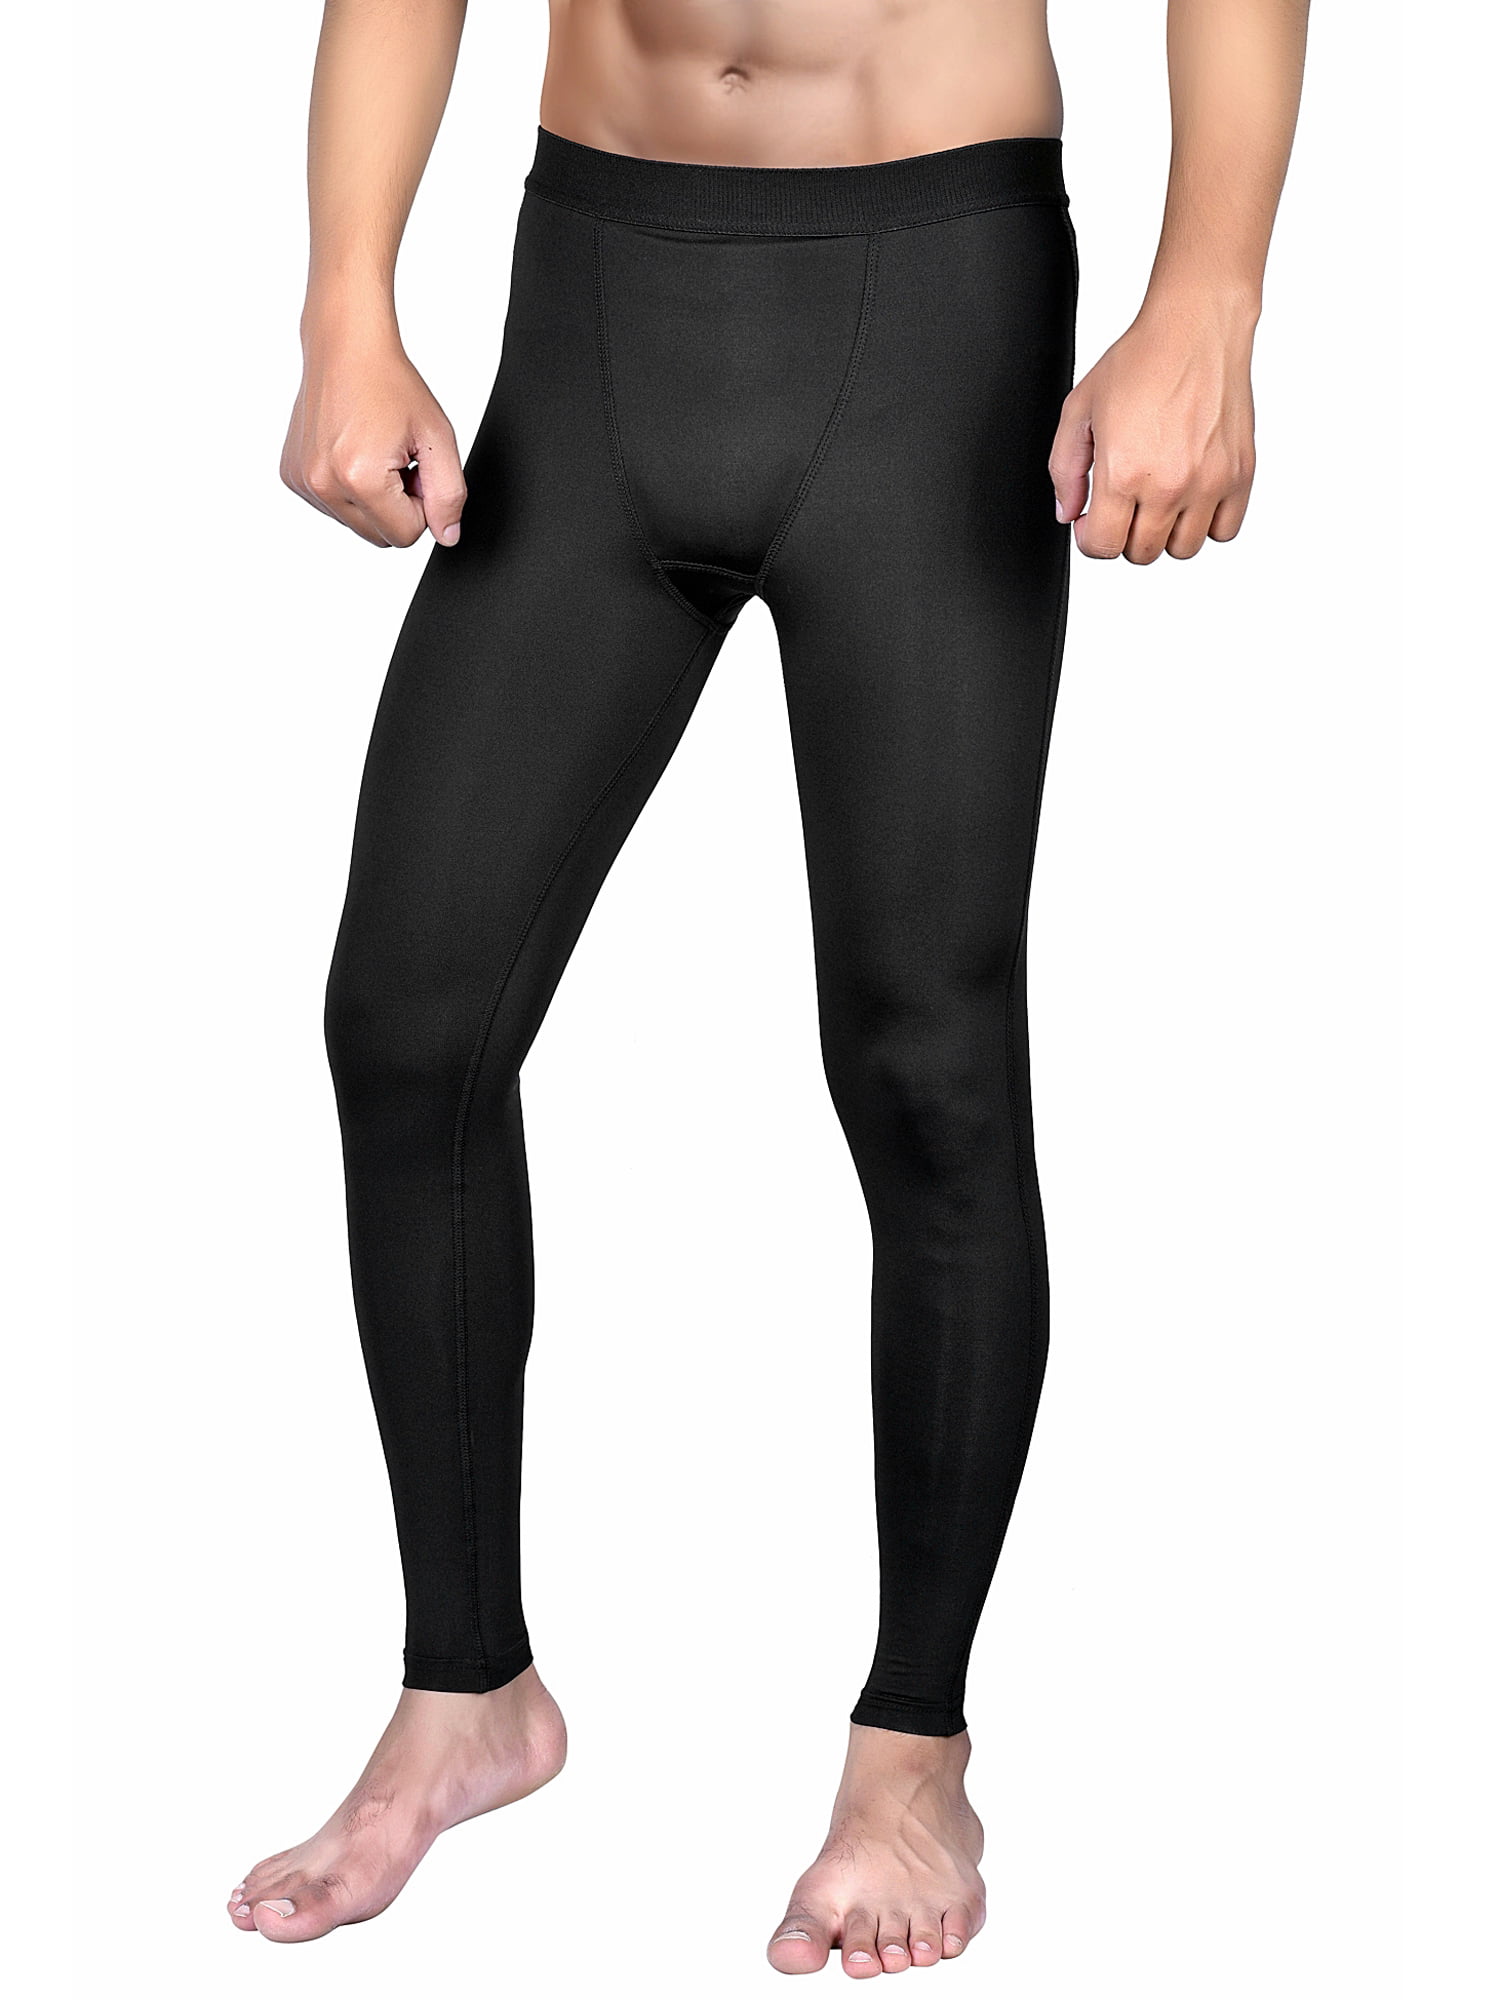 Allywit Mens Compression Pants Cool Dry Baselayer Tights Leggings